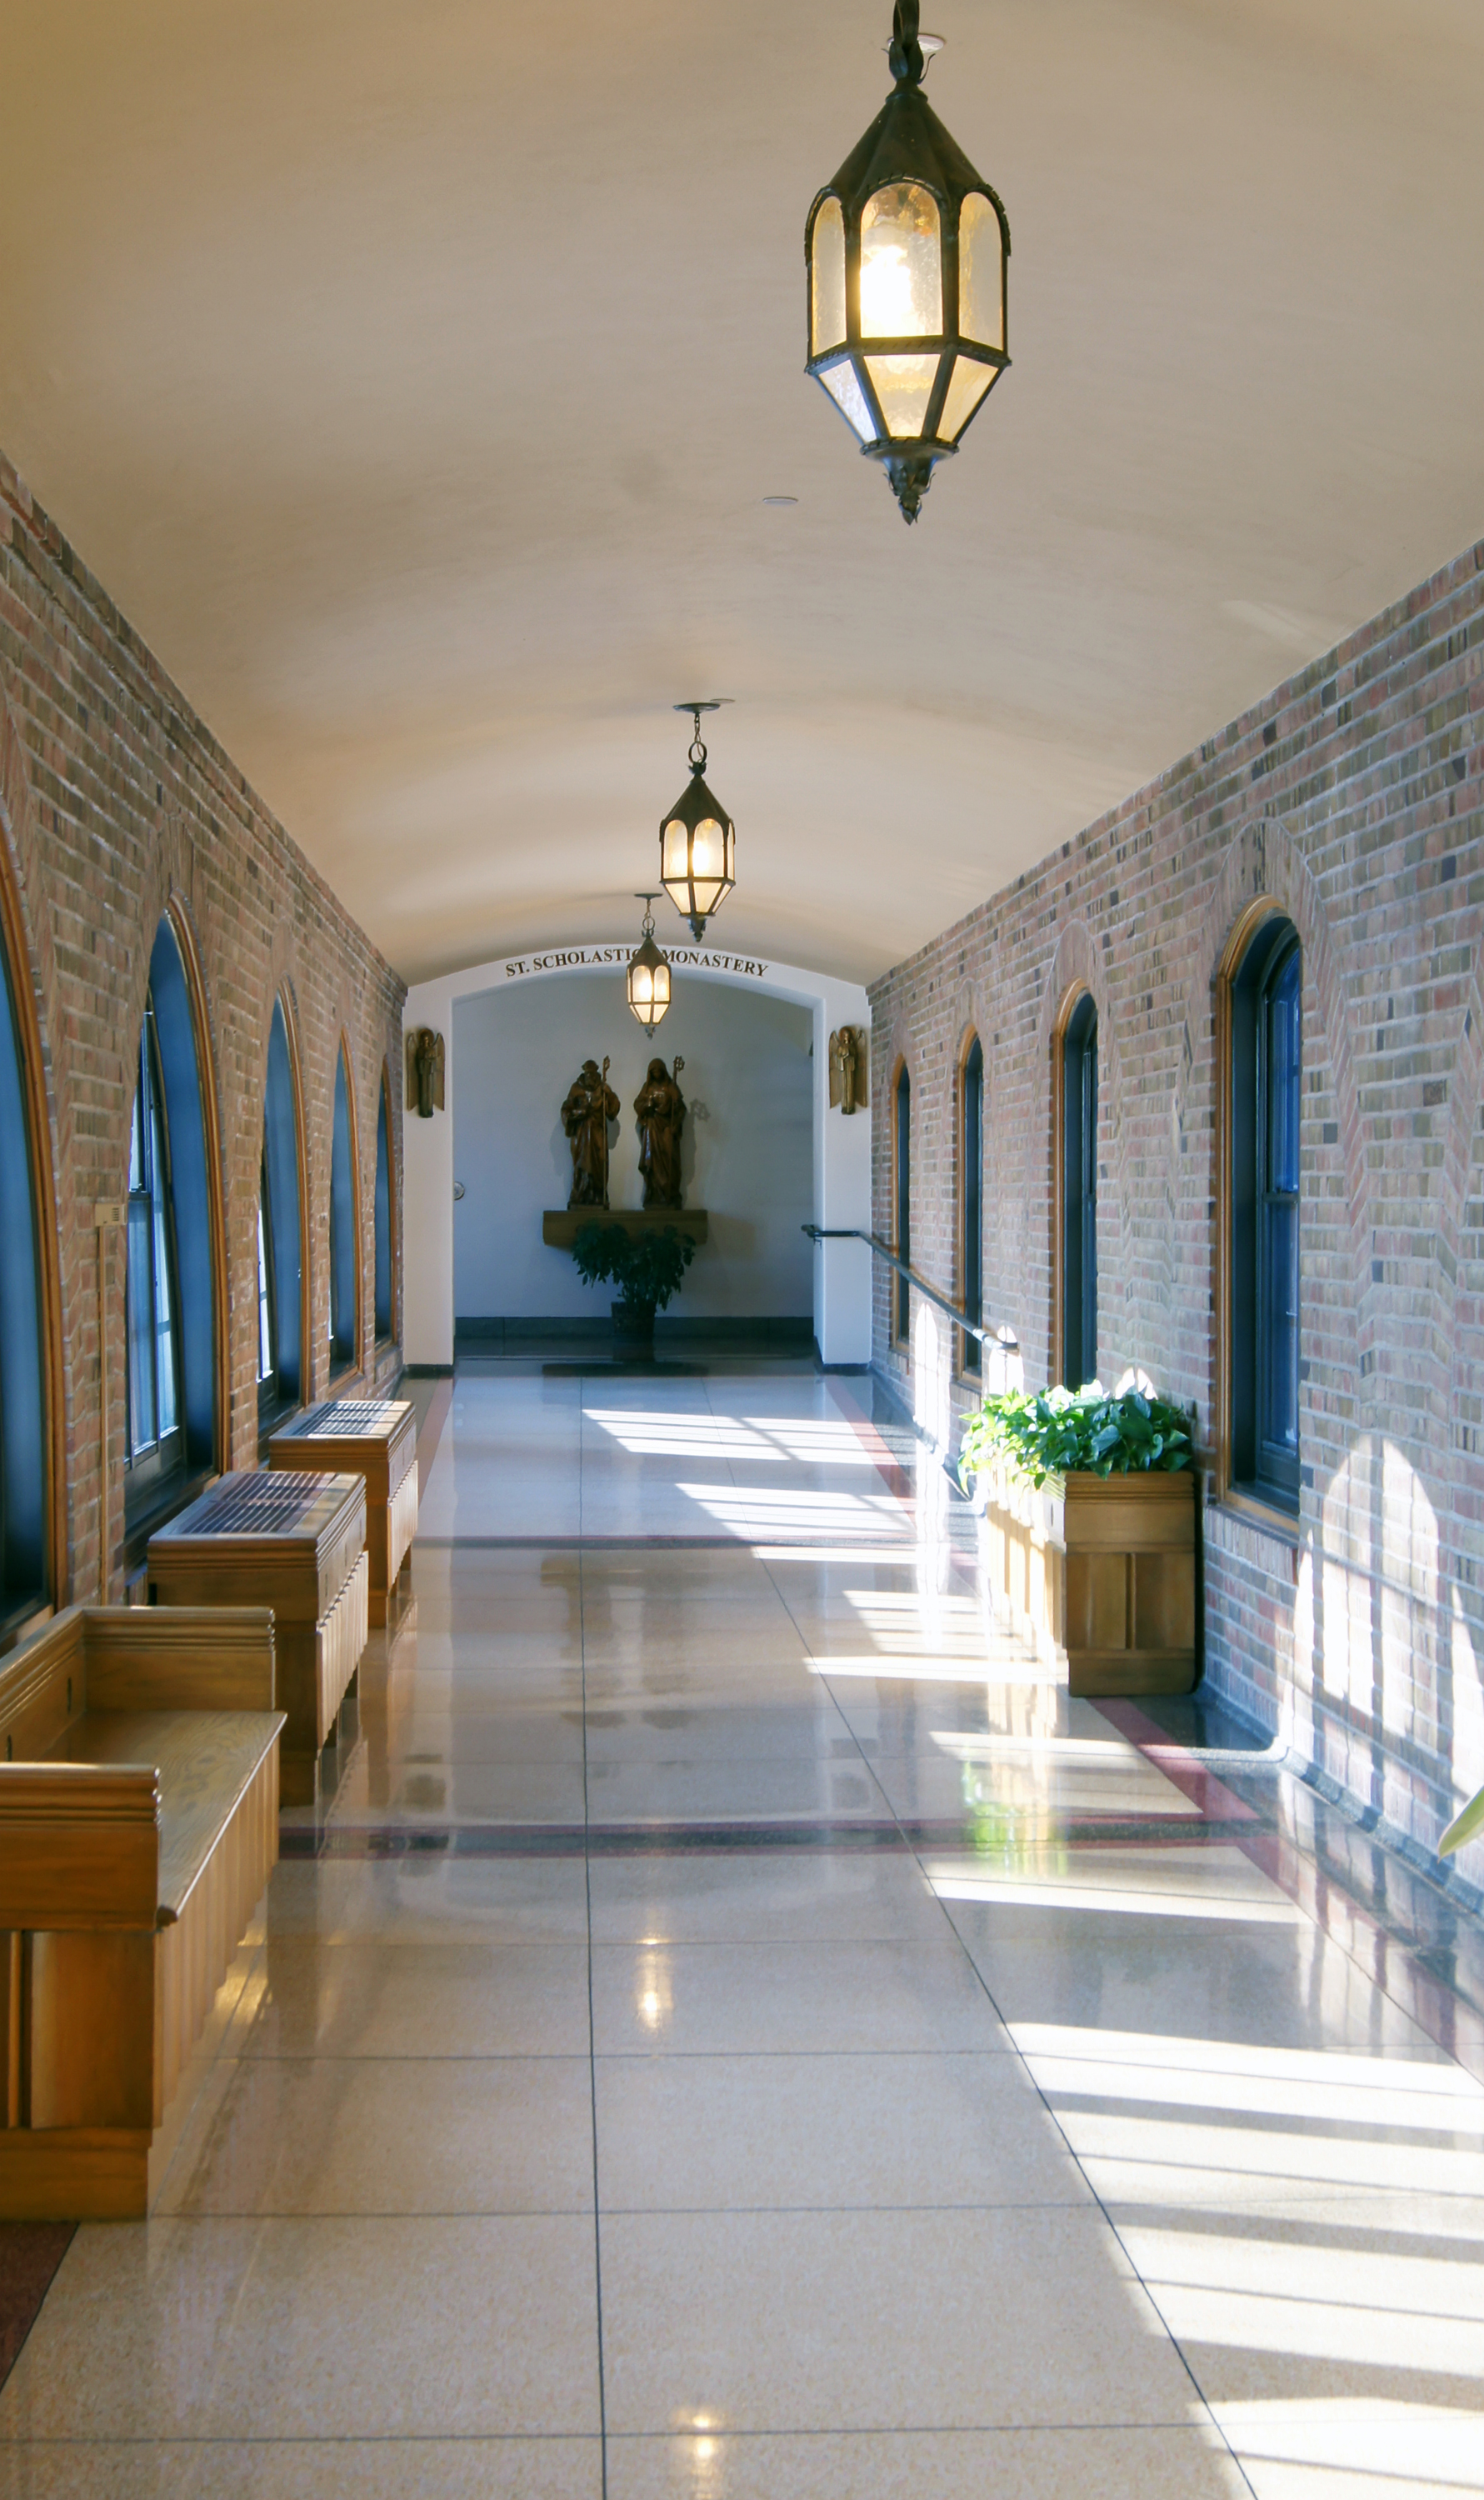 The cloister walk connects the Chapel and Monastery. It is a place of beauty, peace, and silence that provides a contemplative transition from prayer to ministry. A second cloister walk connects the Chapel to the College of St. Scholastica.